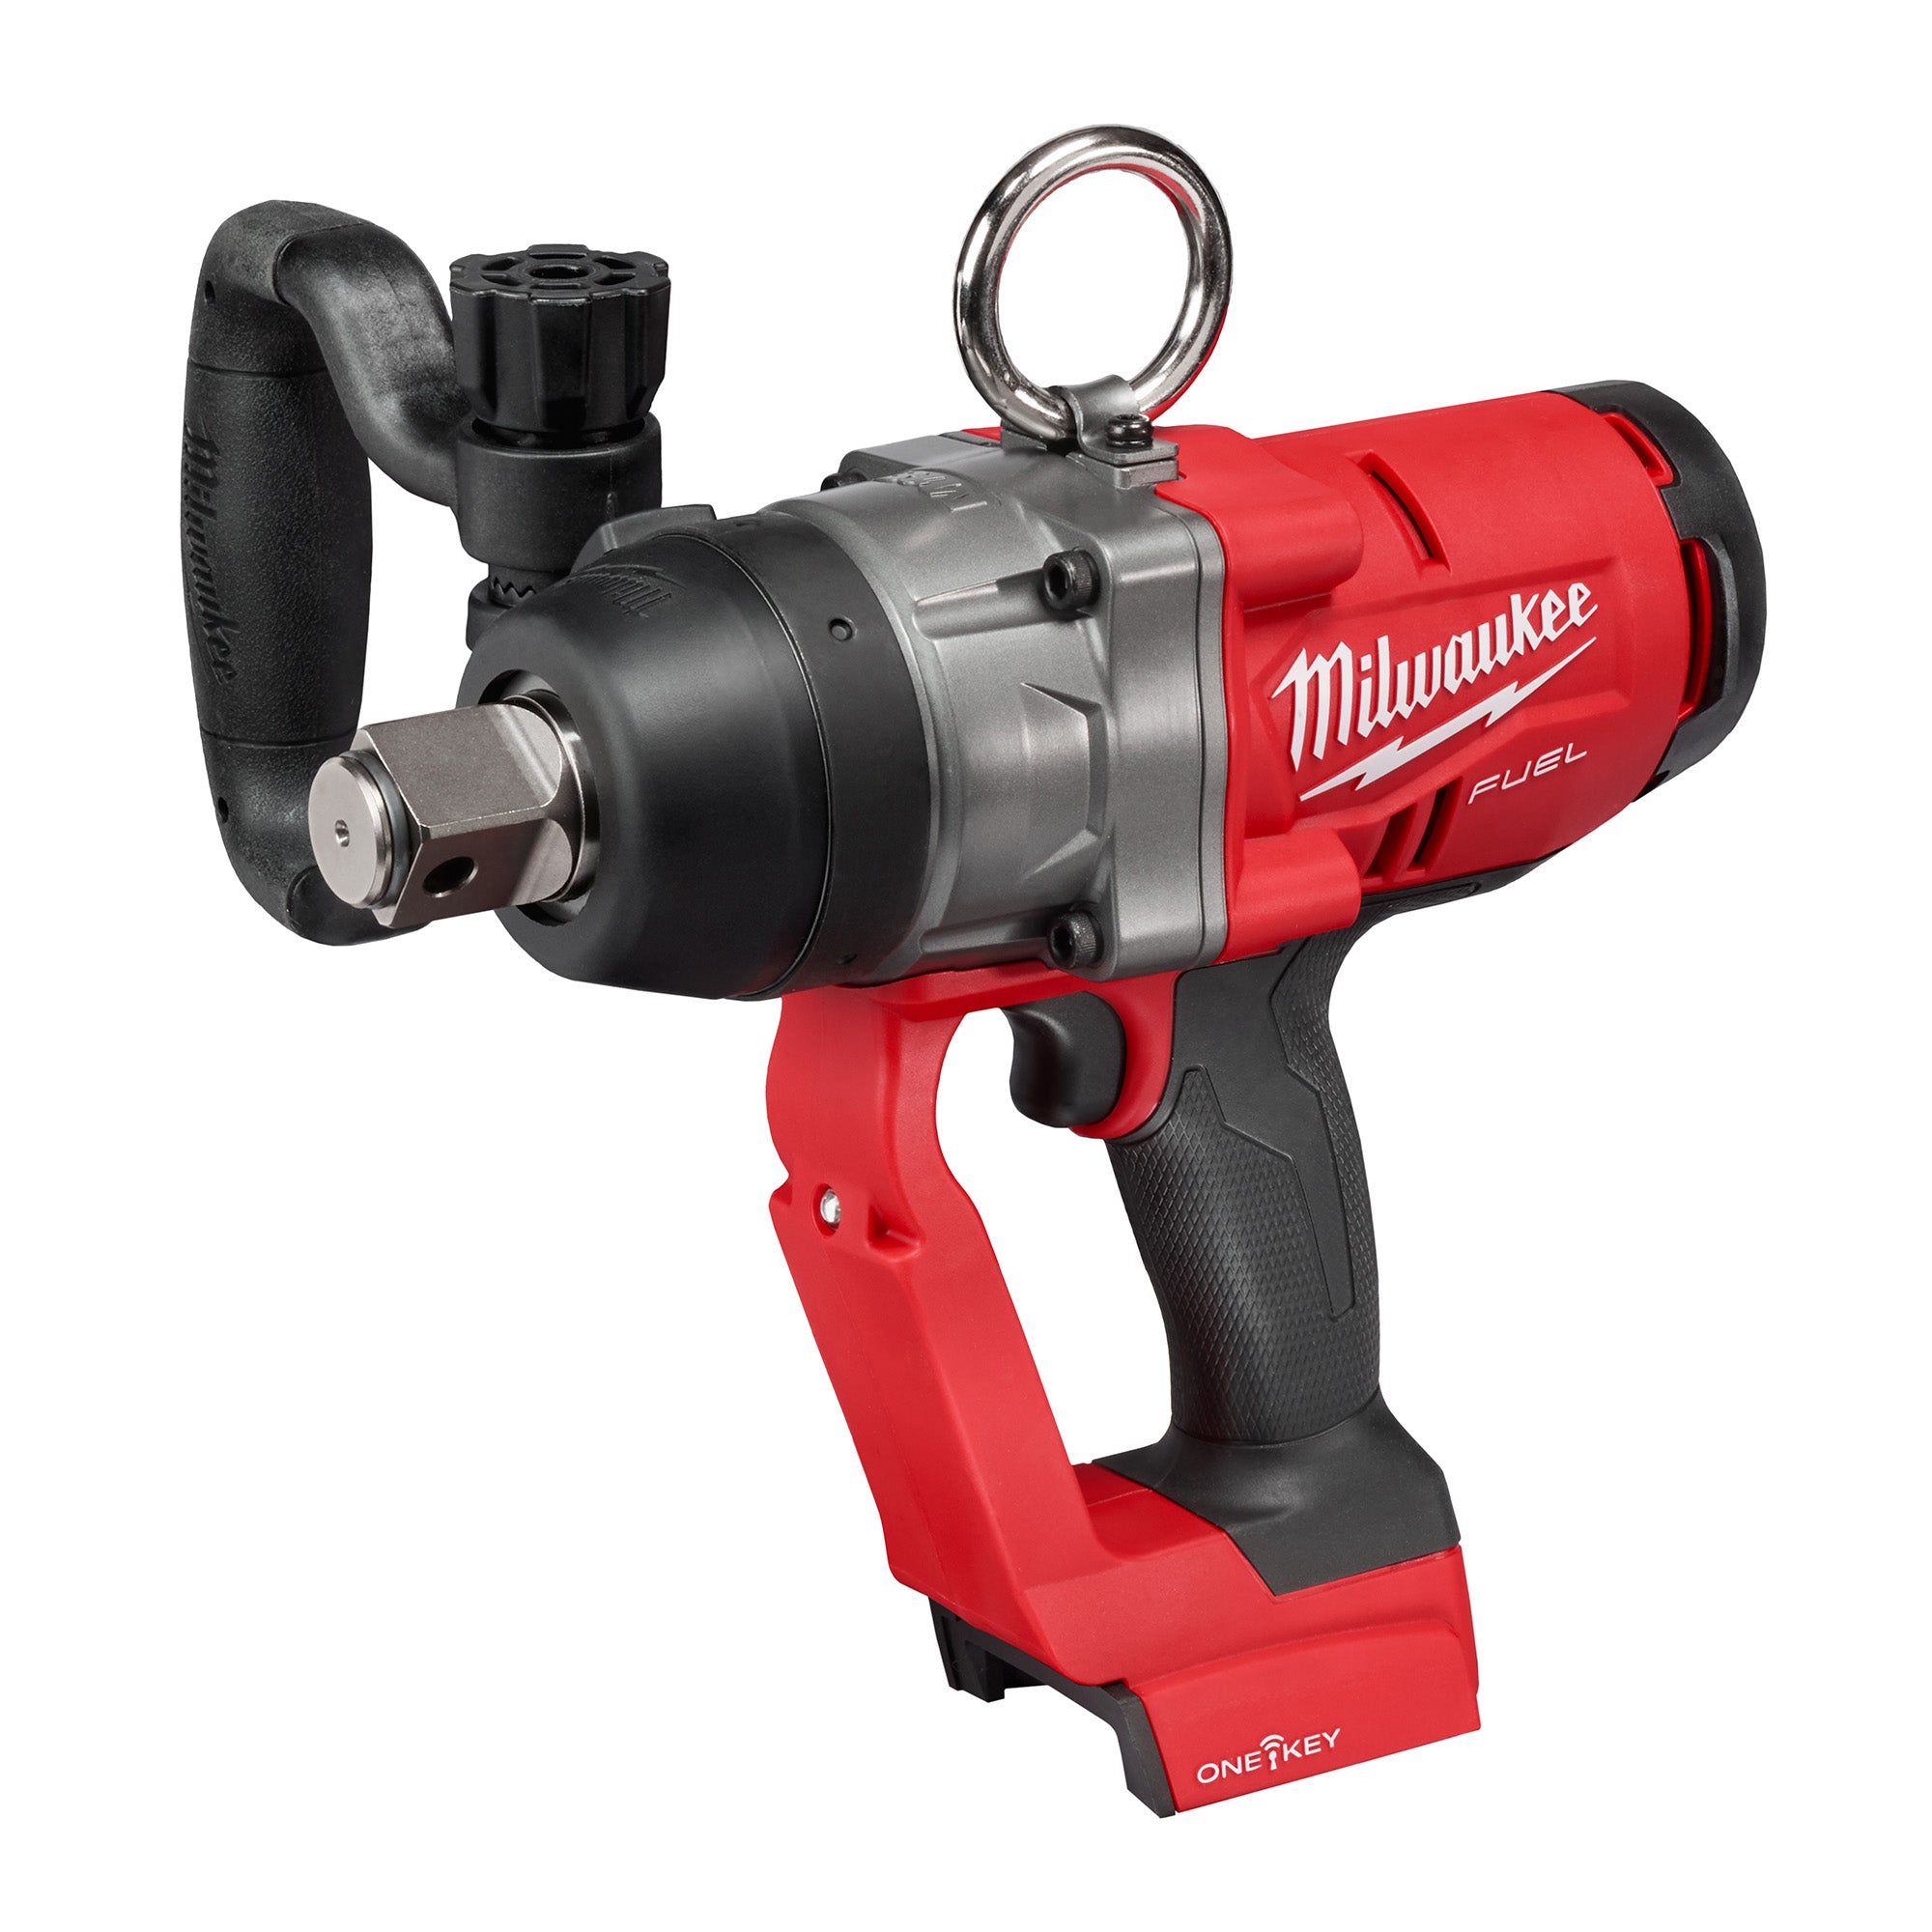 18V M18 FUEL Lithium-Ion Brushless Cordless 1" High Torque Impact Wrench w/ ONE-KEY (Tool Only)